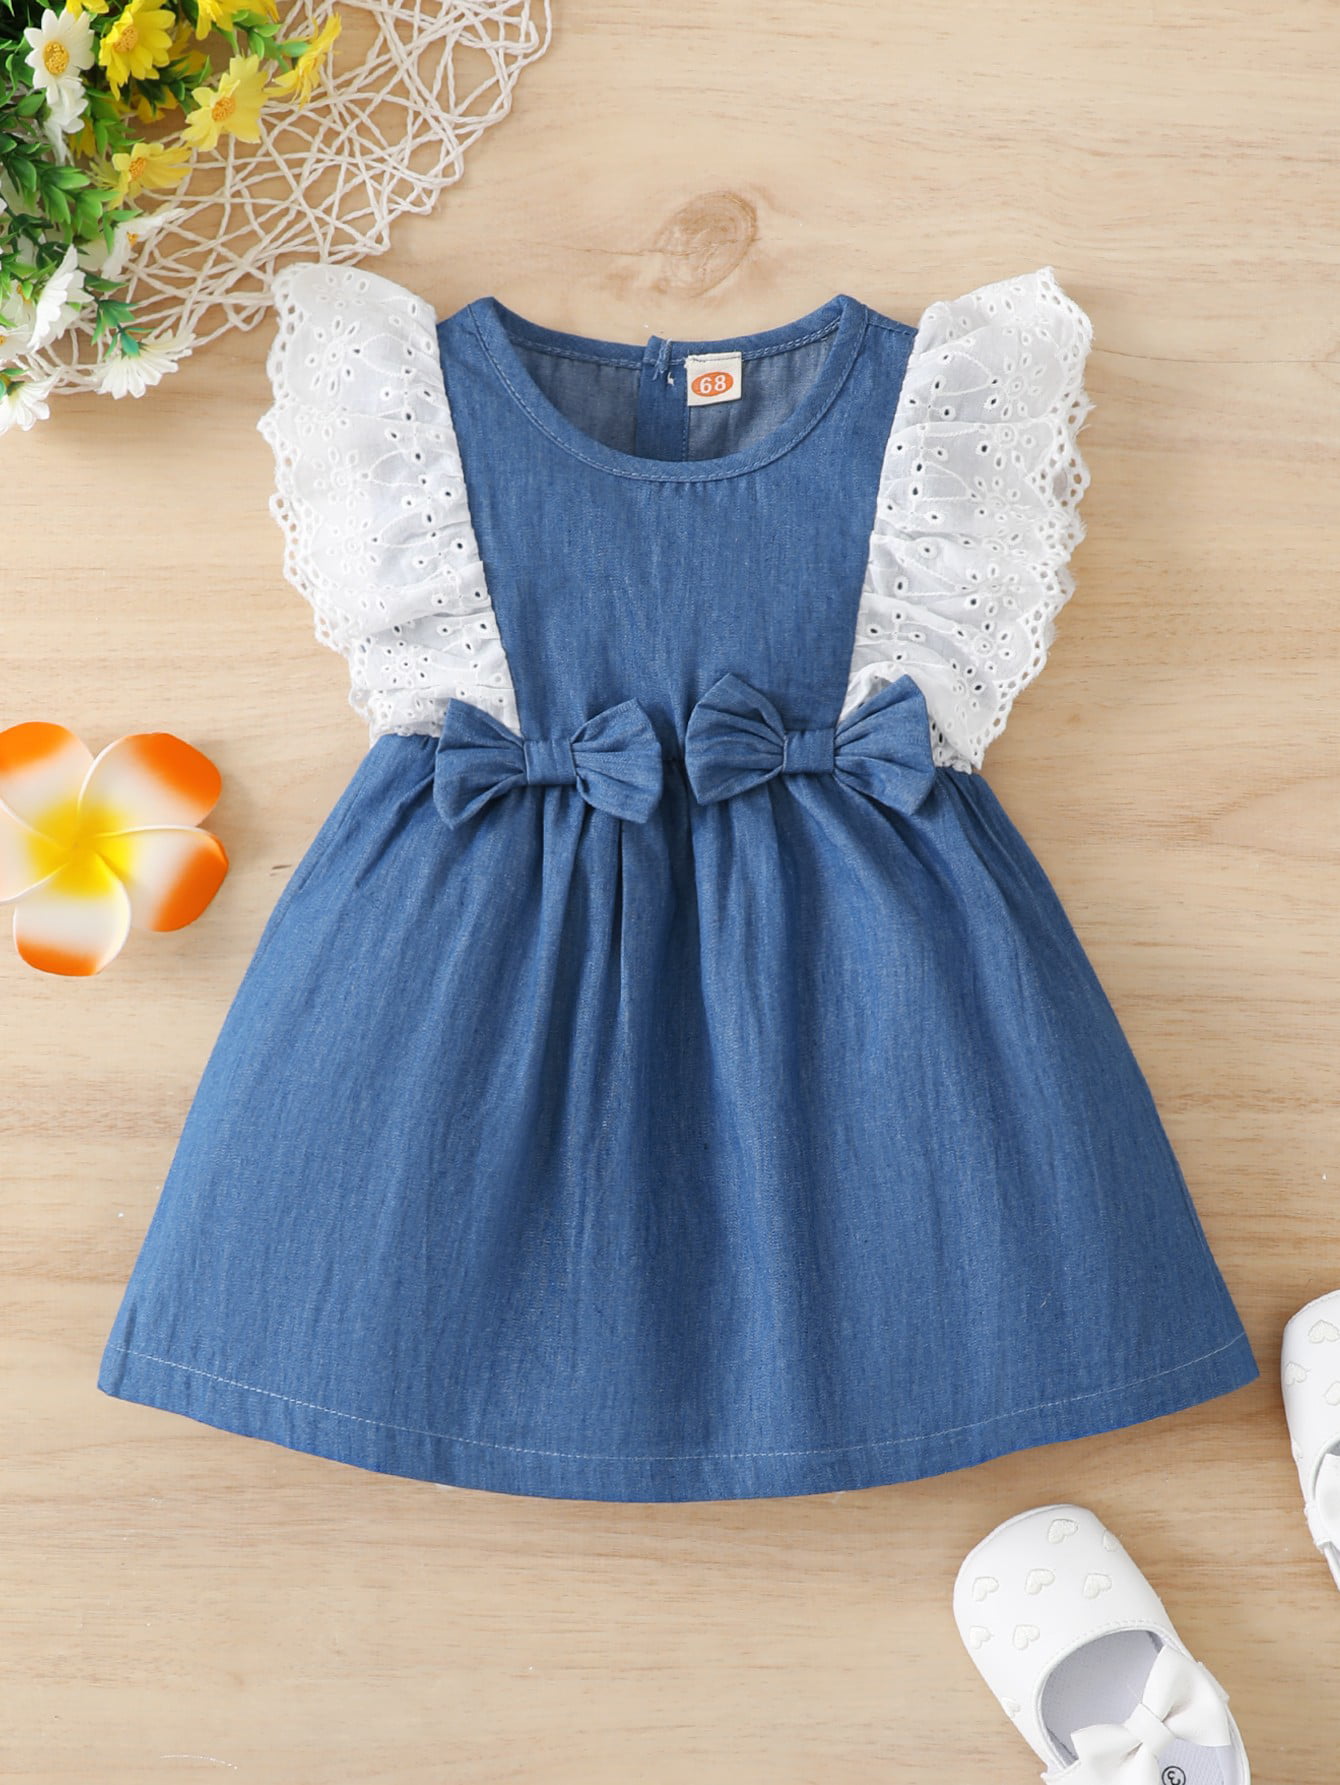 Share 267+ baby girl denim outfit latest